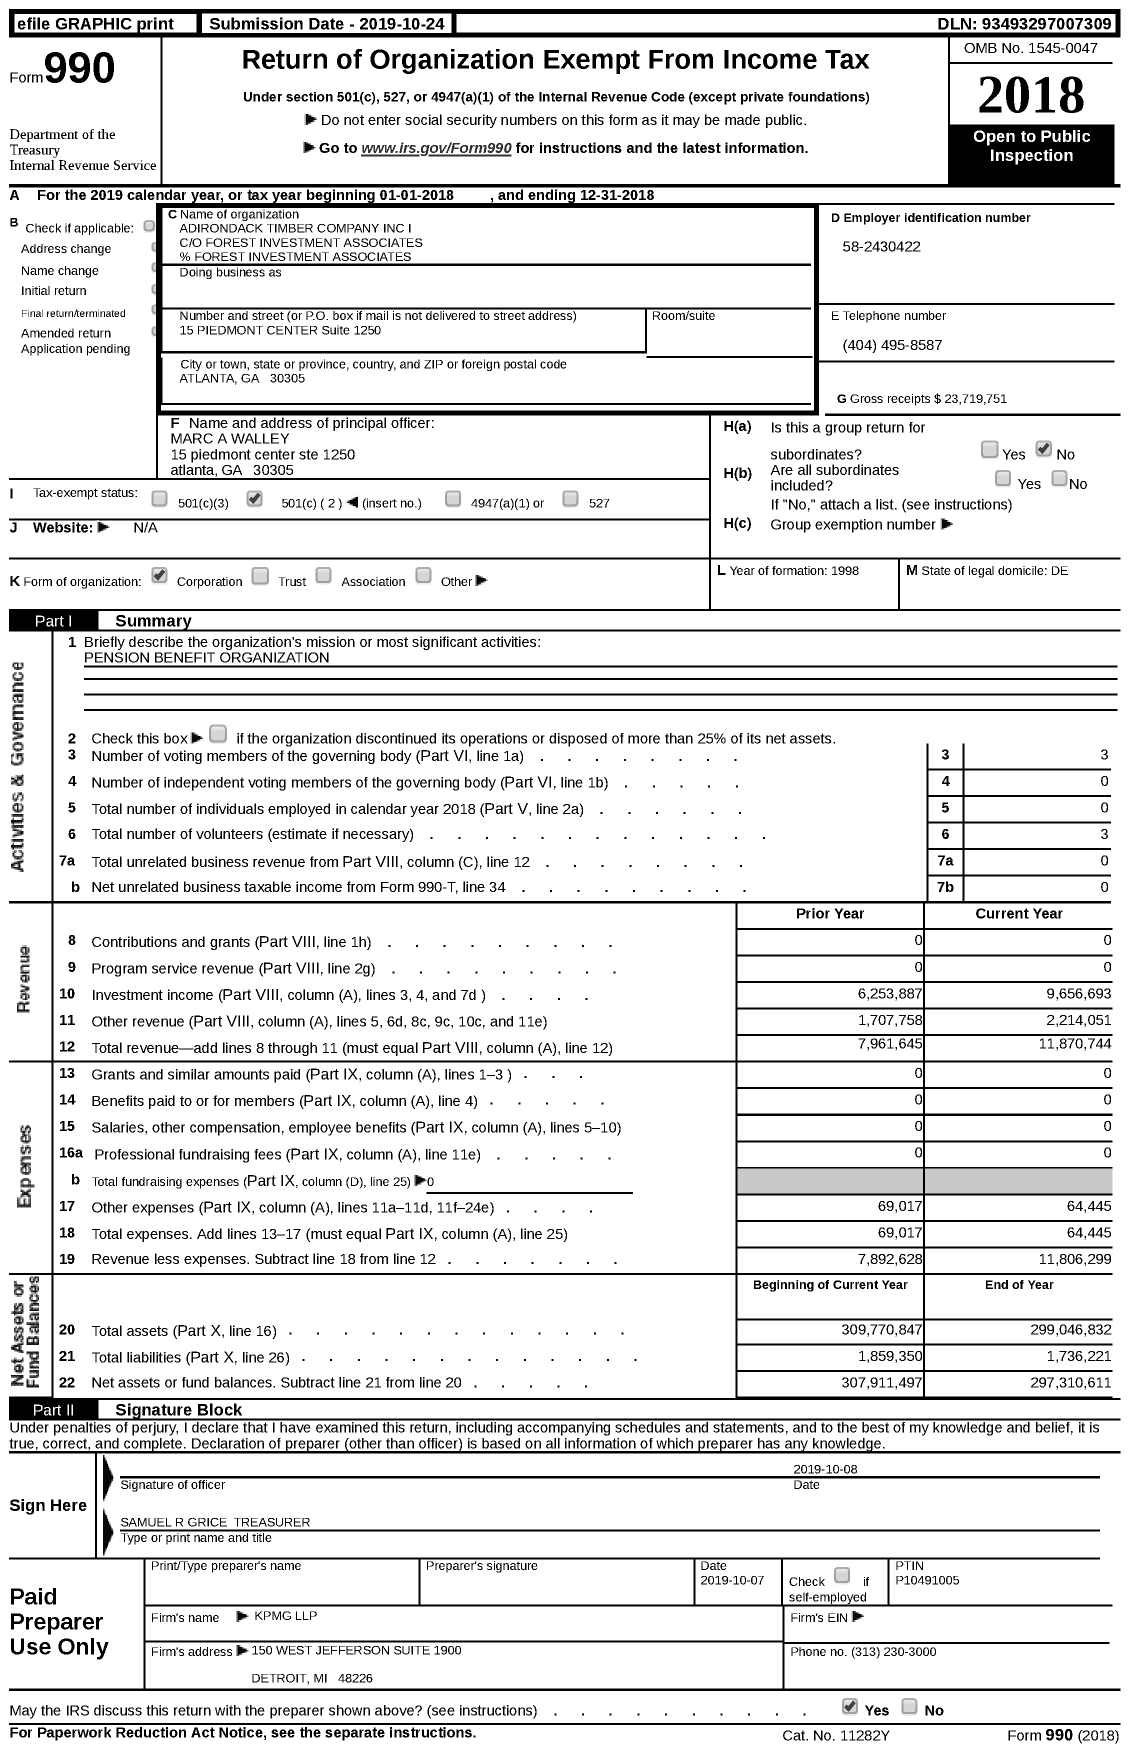 Image of first page of 2018 Form 990 for Adirondack Timber Company